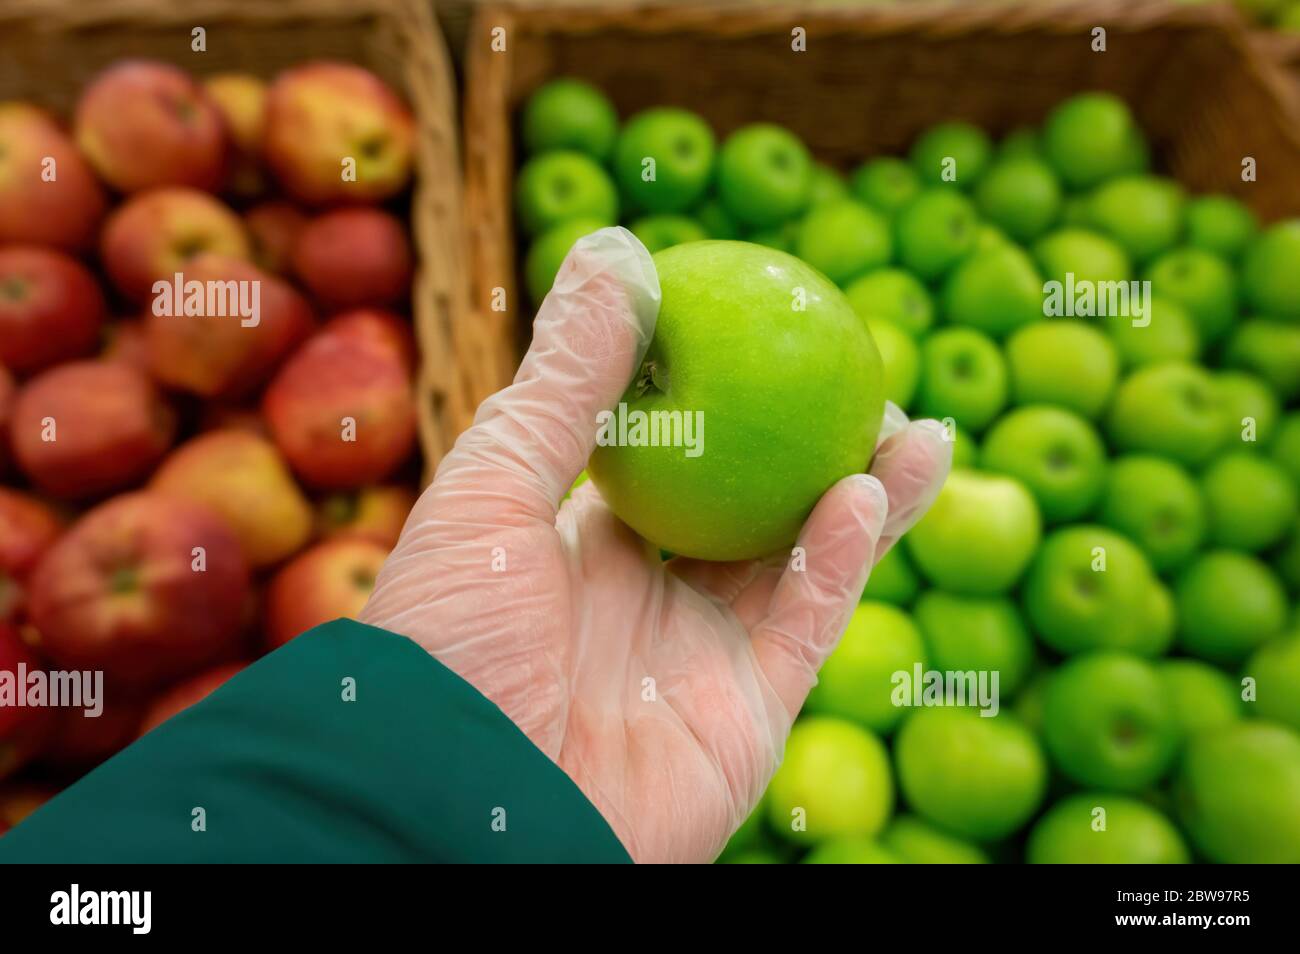 the buyer picks apples in the store and wears protective gloves, maintaining hygienic safety and measures due to the quarantine situation and the risk Stock Photo